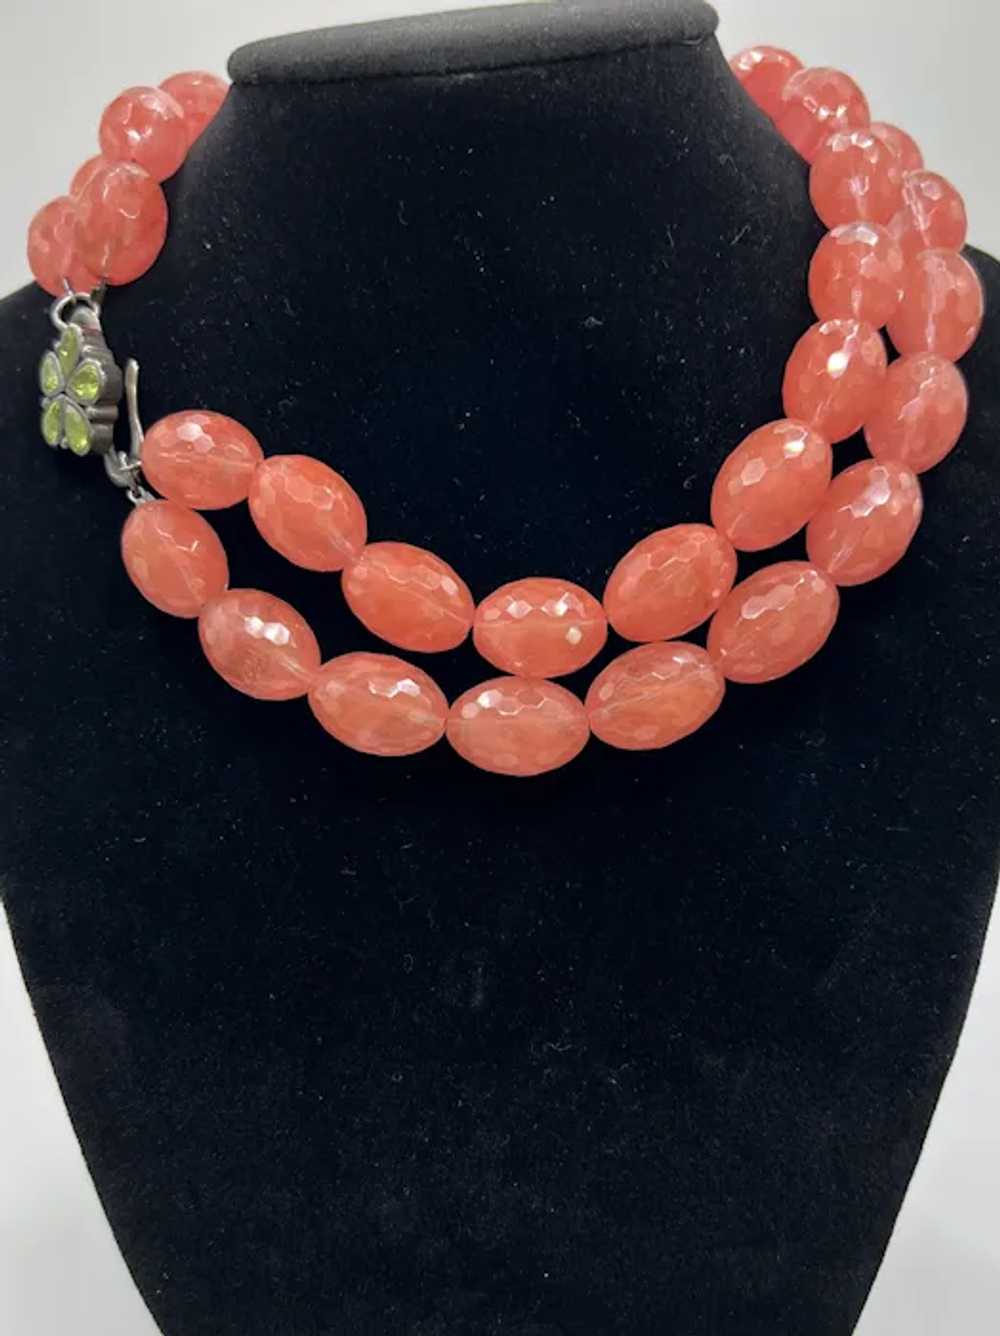 Strawberry quartz faceted double strand necklace - image 3